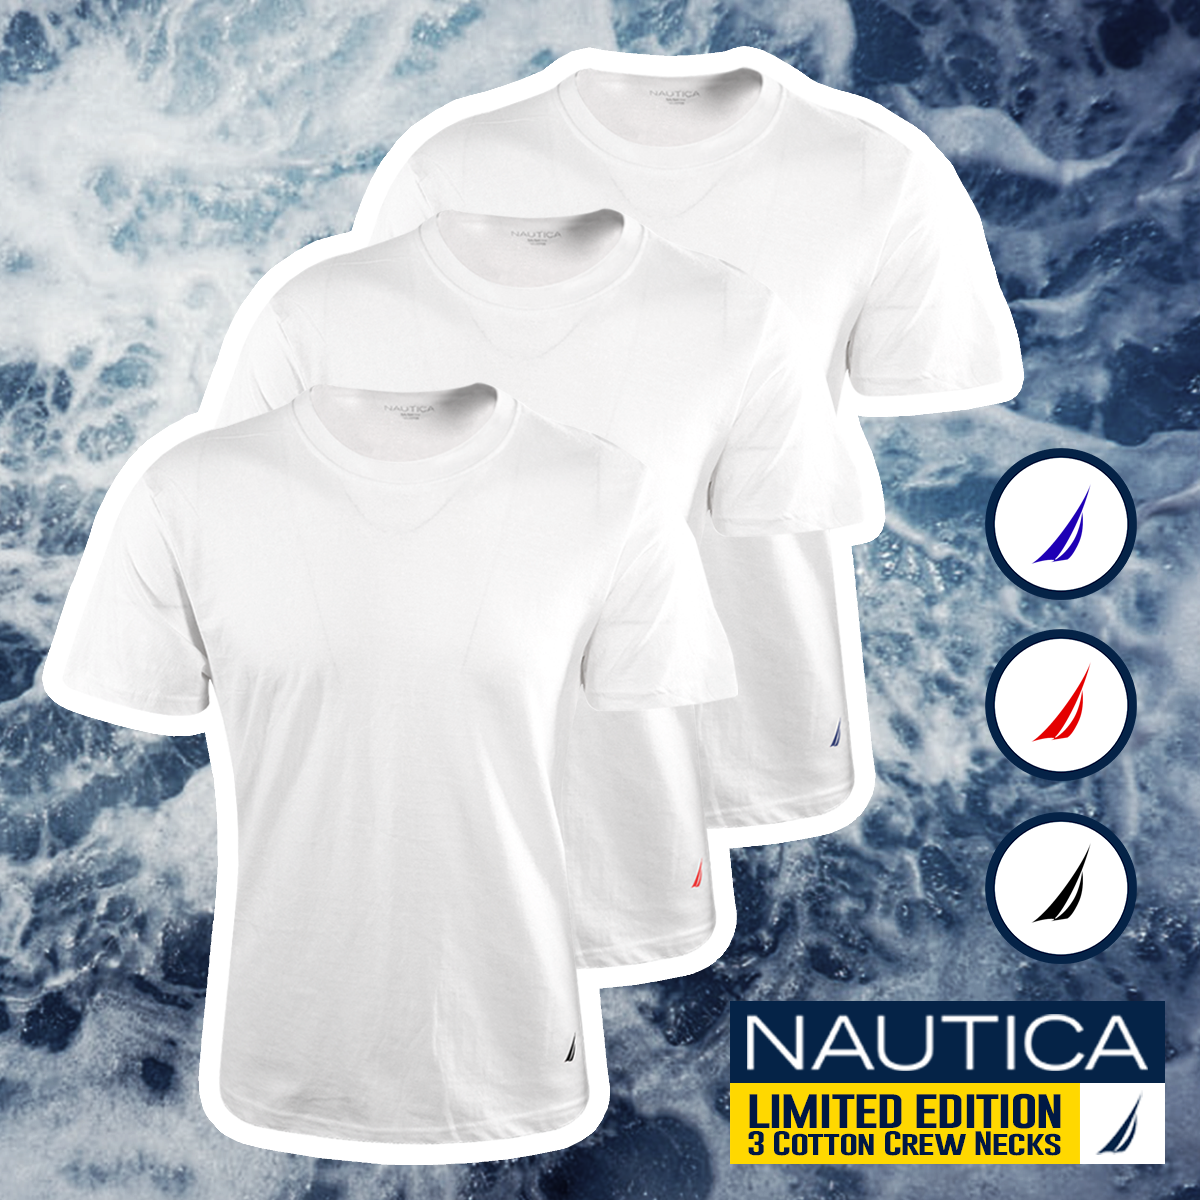 Nautica Men's 3 Pack Limited Edition Crew Neck S/S T-Shirt